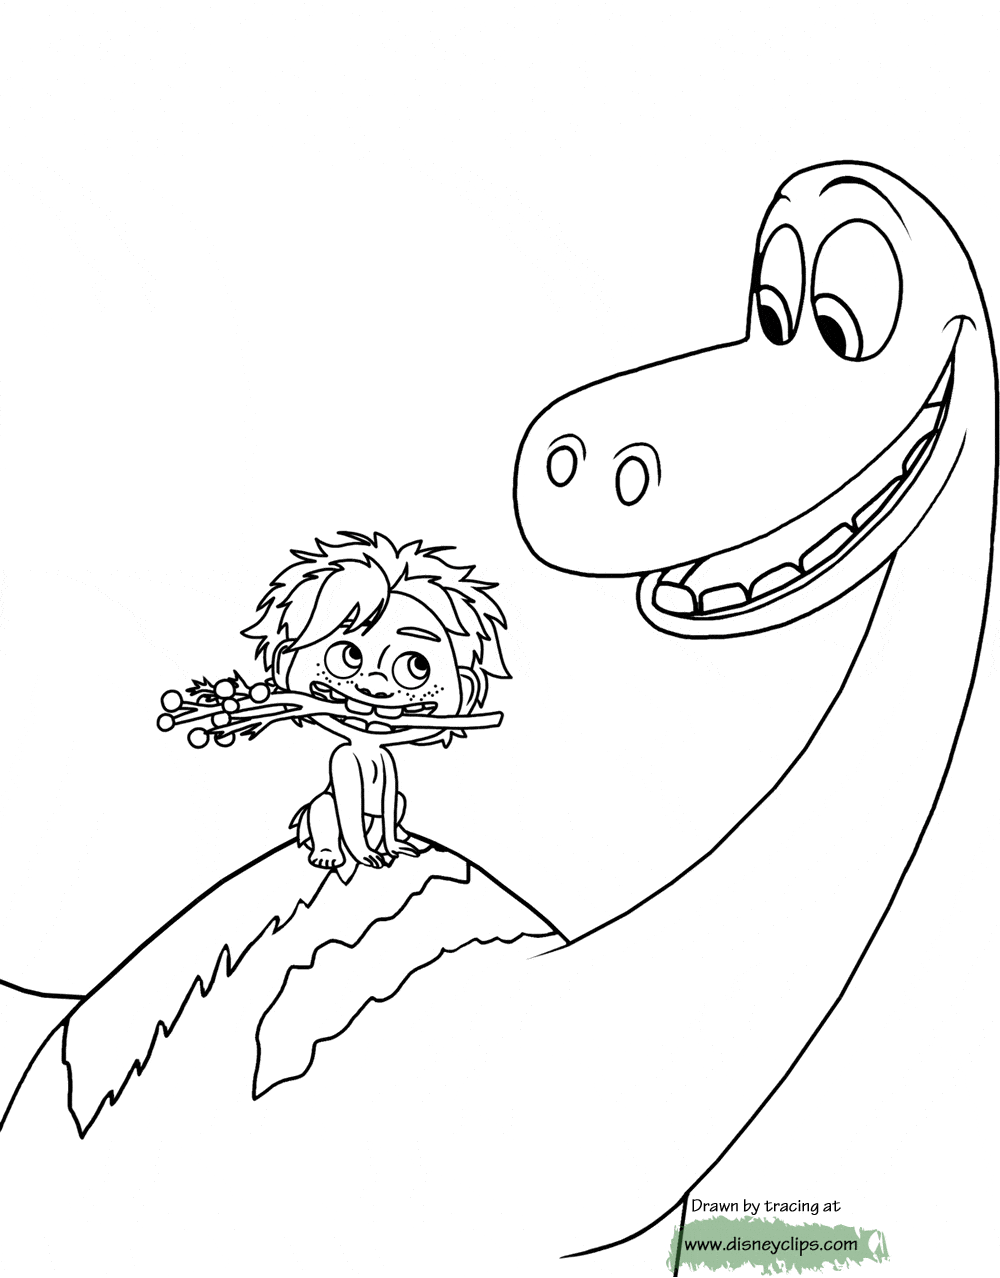 The Good Dinosaur Printable Coloring Pages | Disney Coloring Book